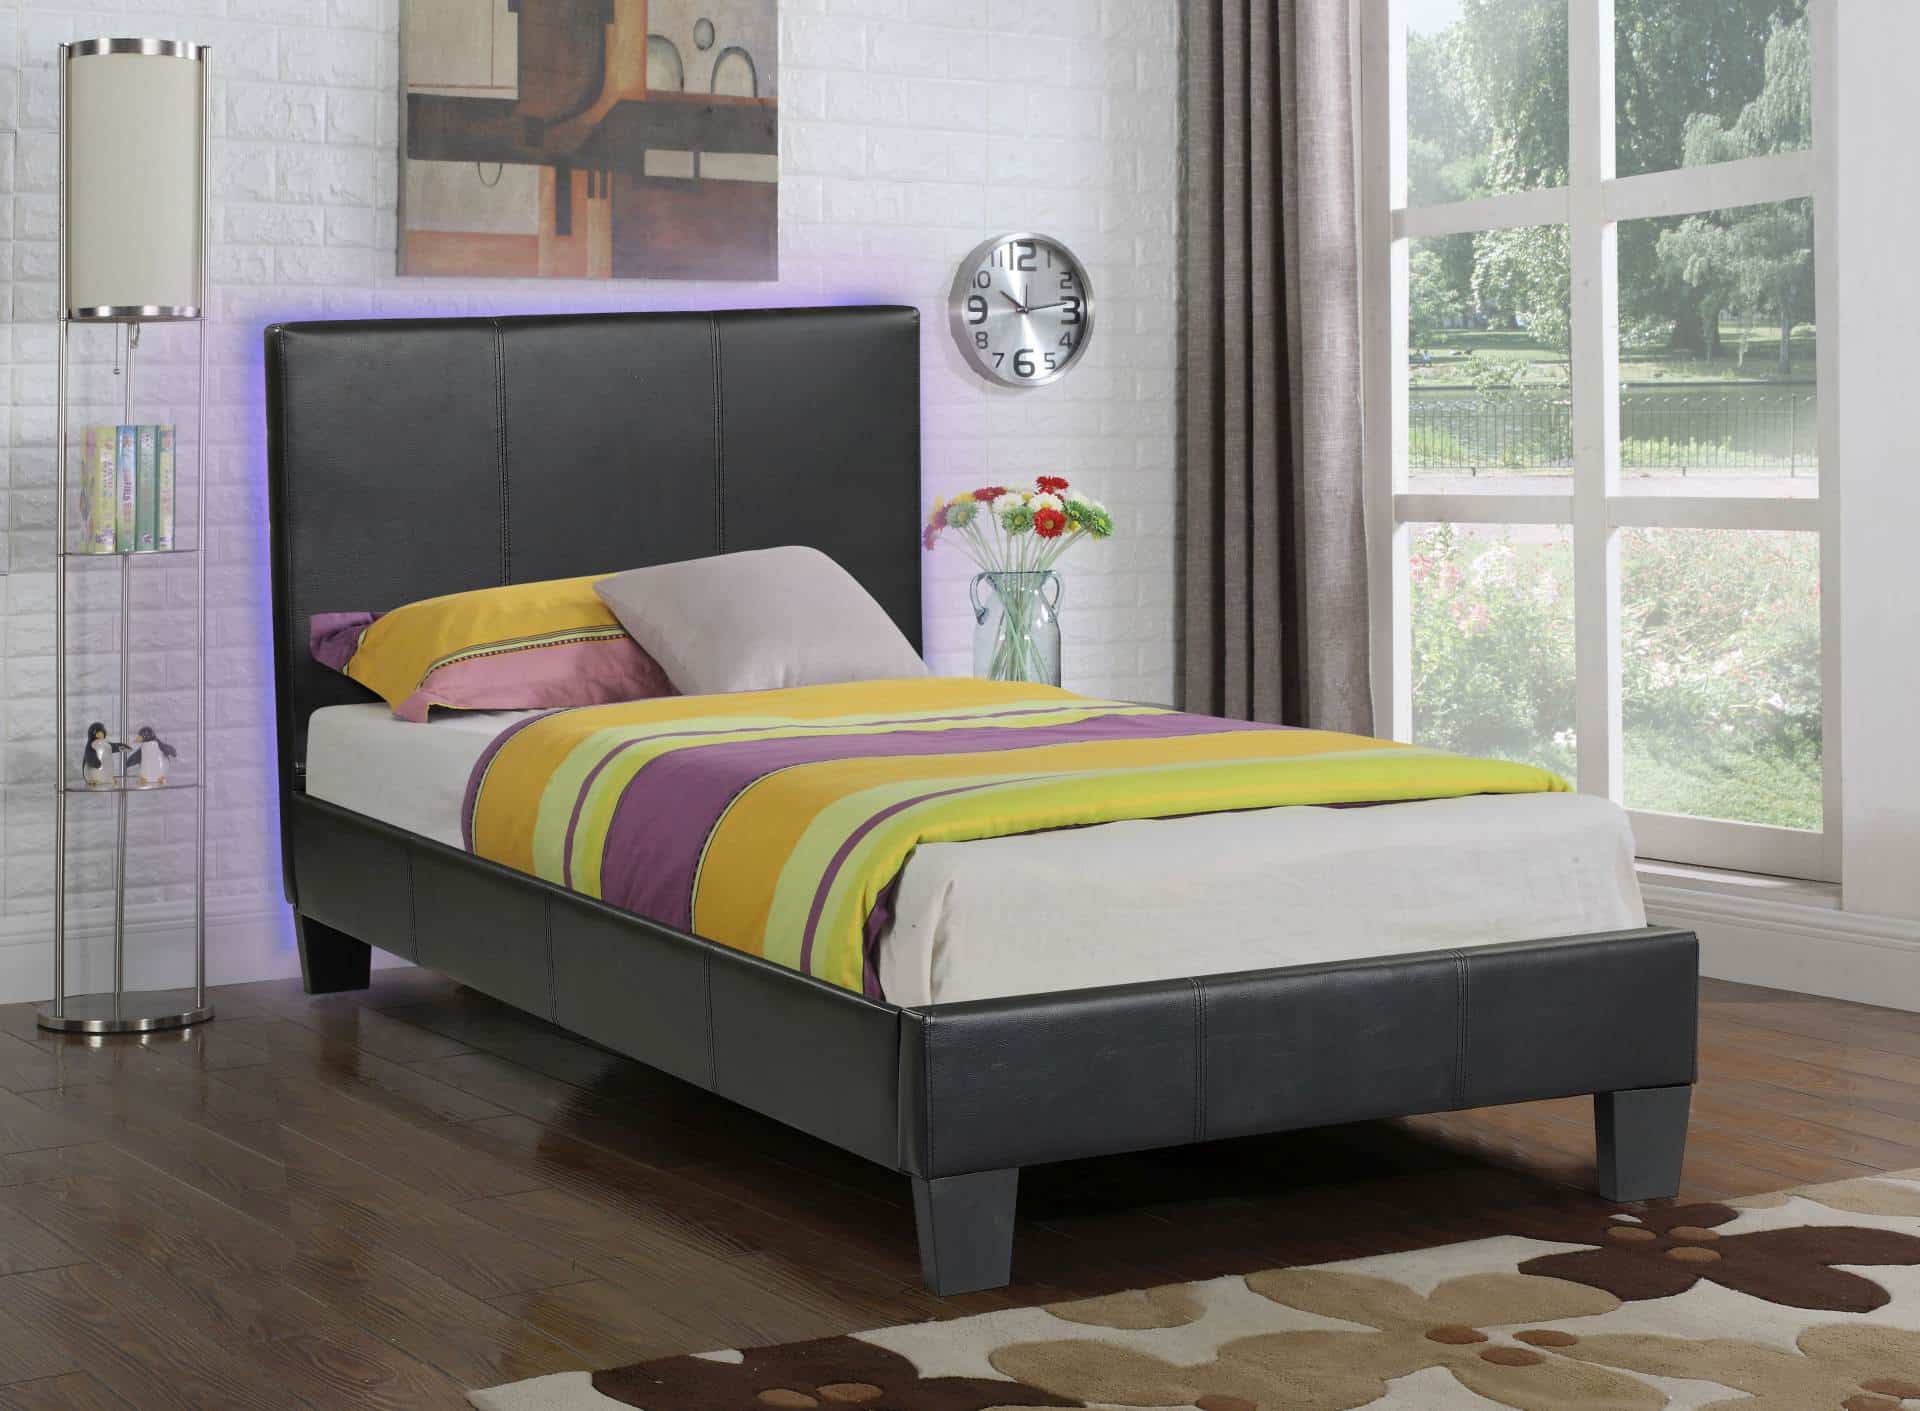 Value Bed 8079-Husky-Furniture- single,twin Double,full- Black-2